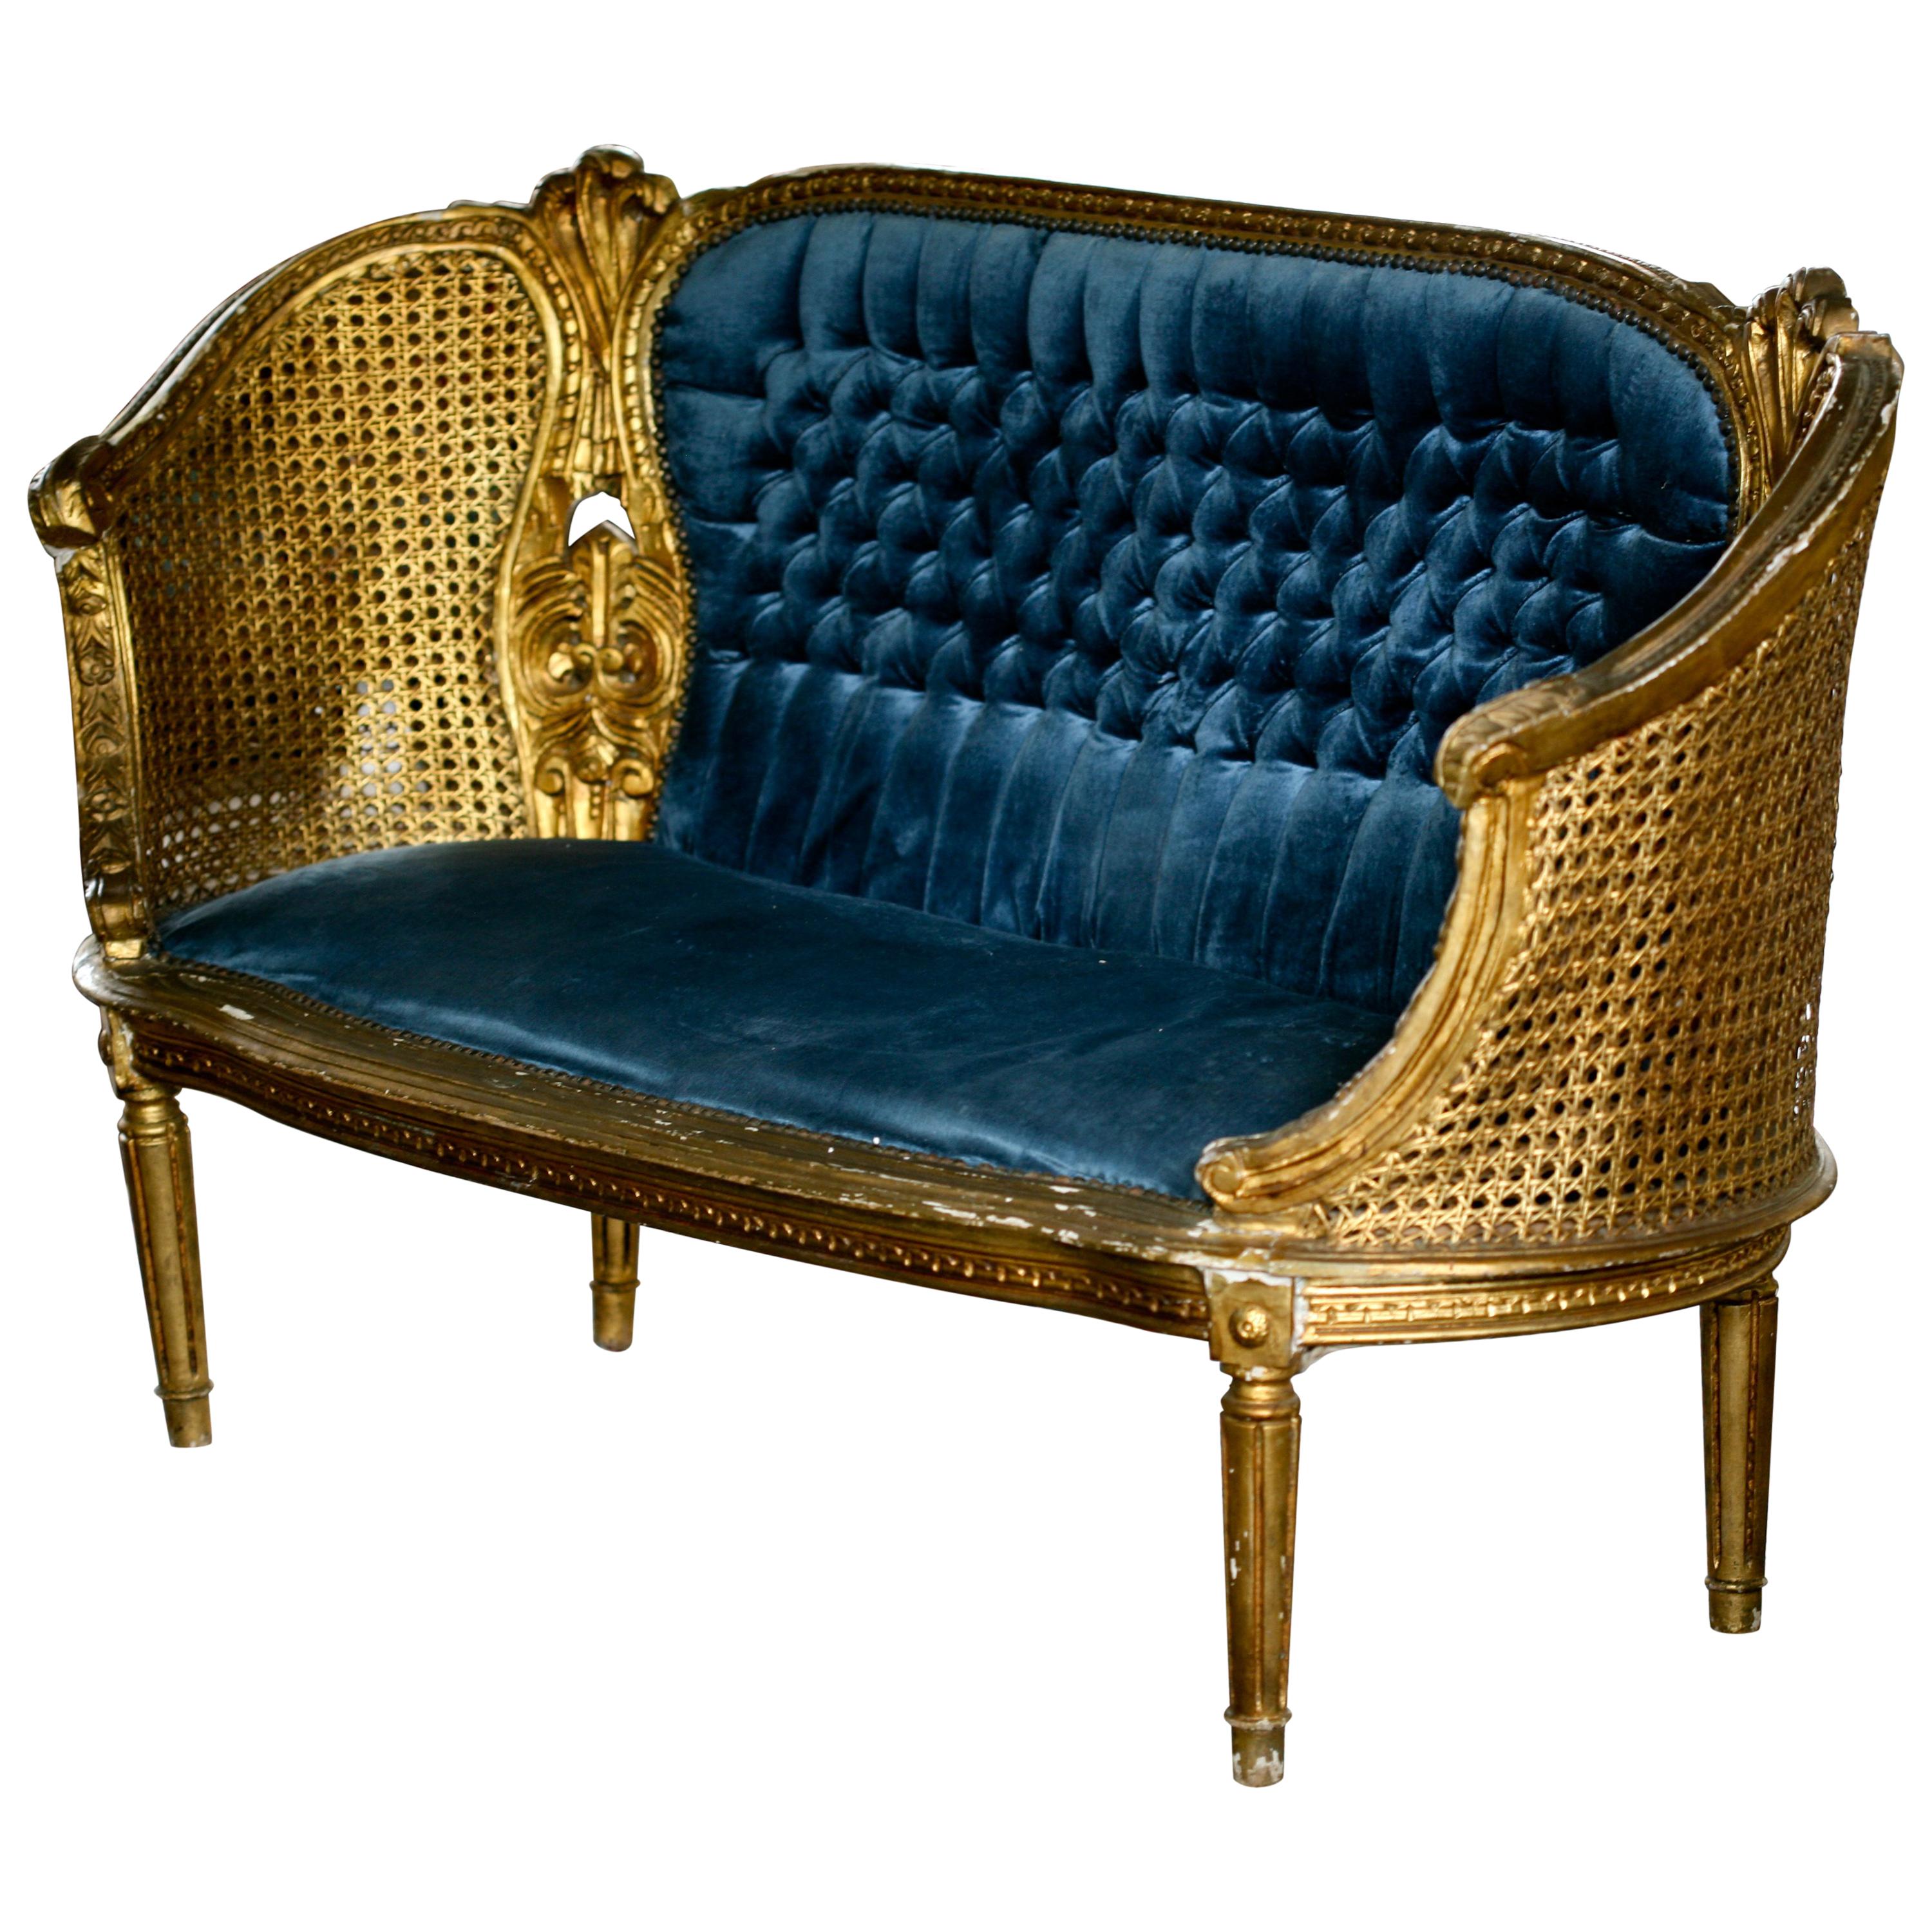 Magnificent French Louis XVI Gilded Cane Blue Settee or Canapé "Corbeille" 